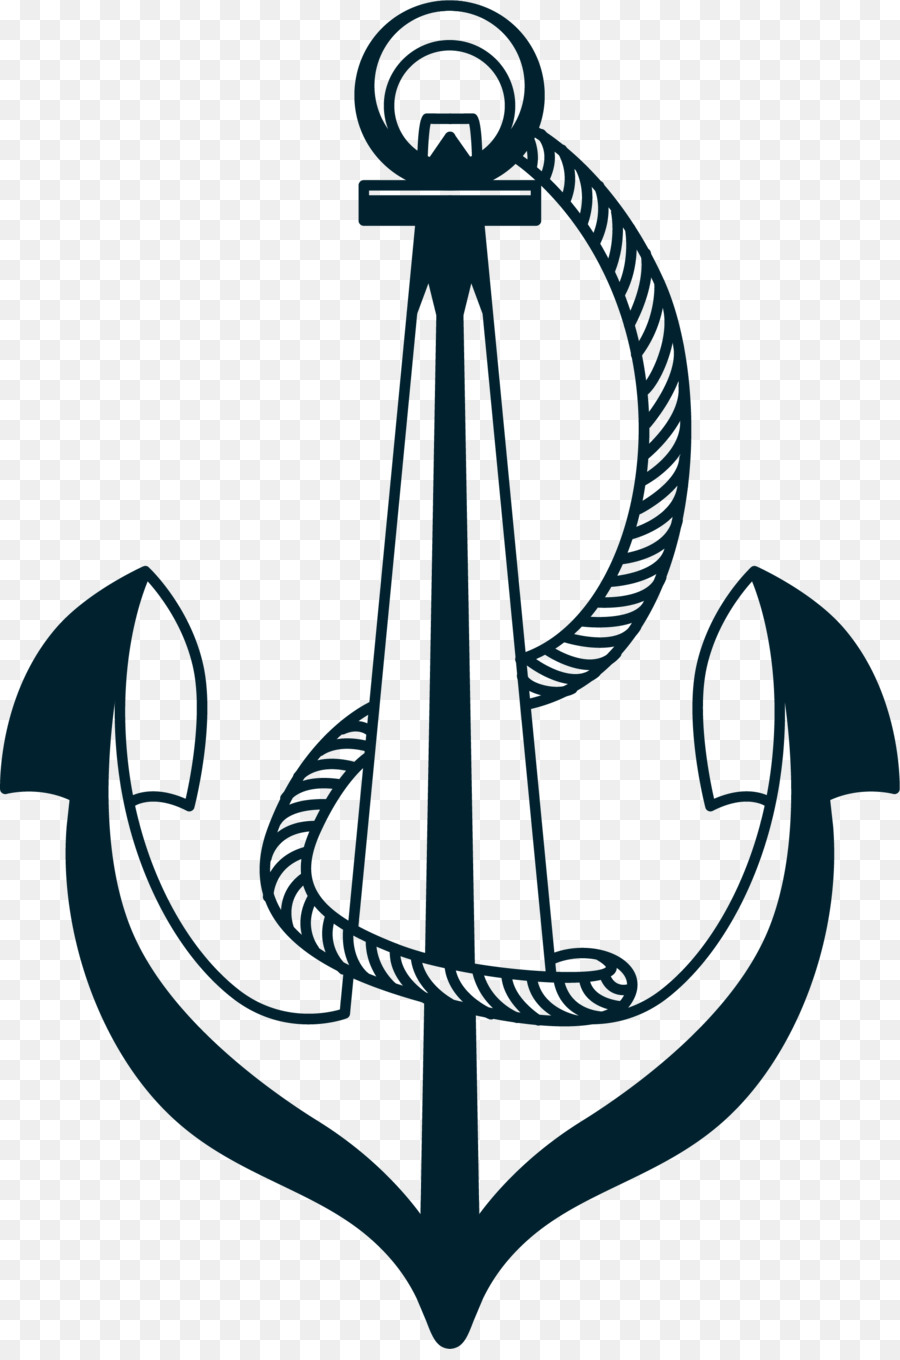 Anchor Ship Watercraft Rope Clip art - Hand painted green anchor rope png download - 2001*3000 - Free Transparent Anchor png Download.